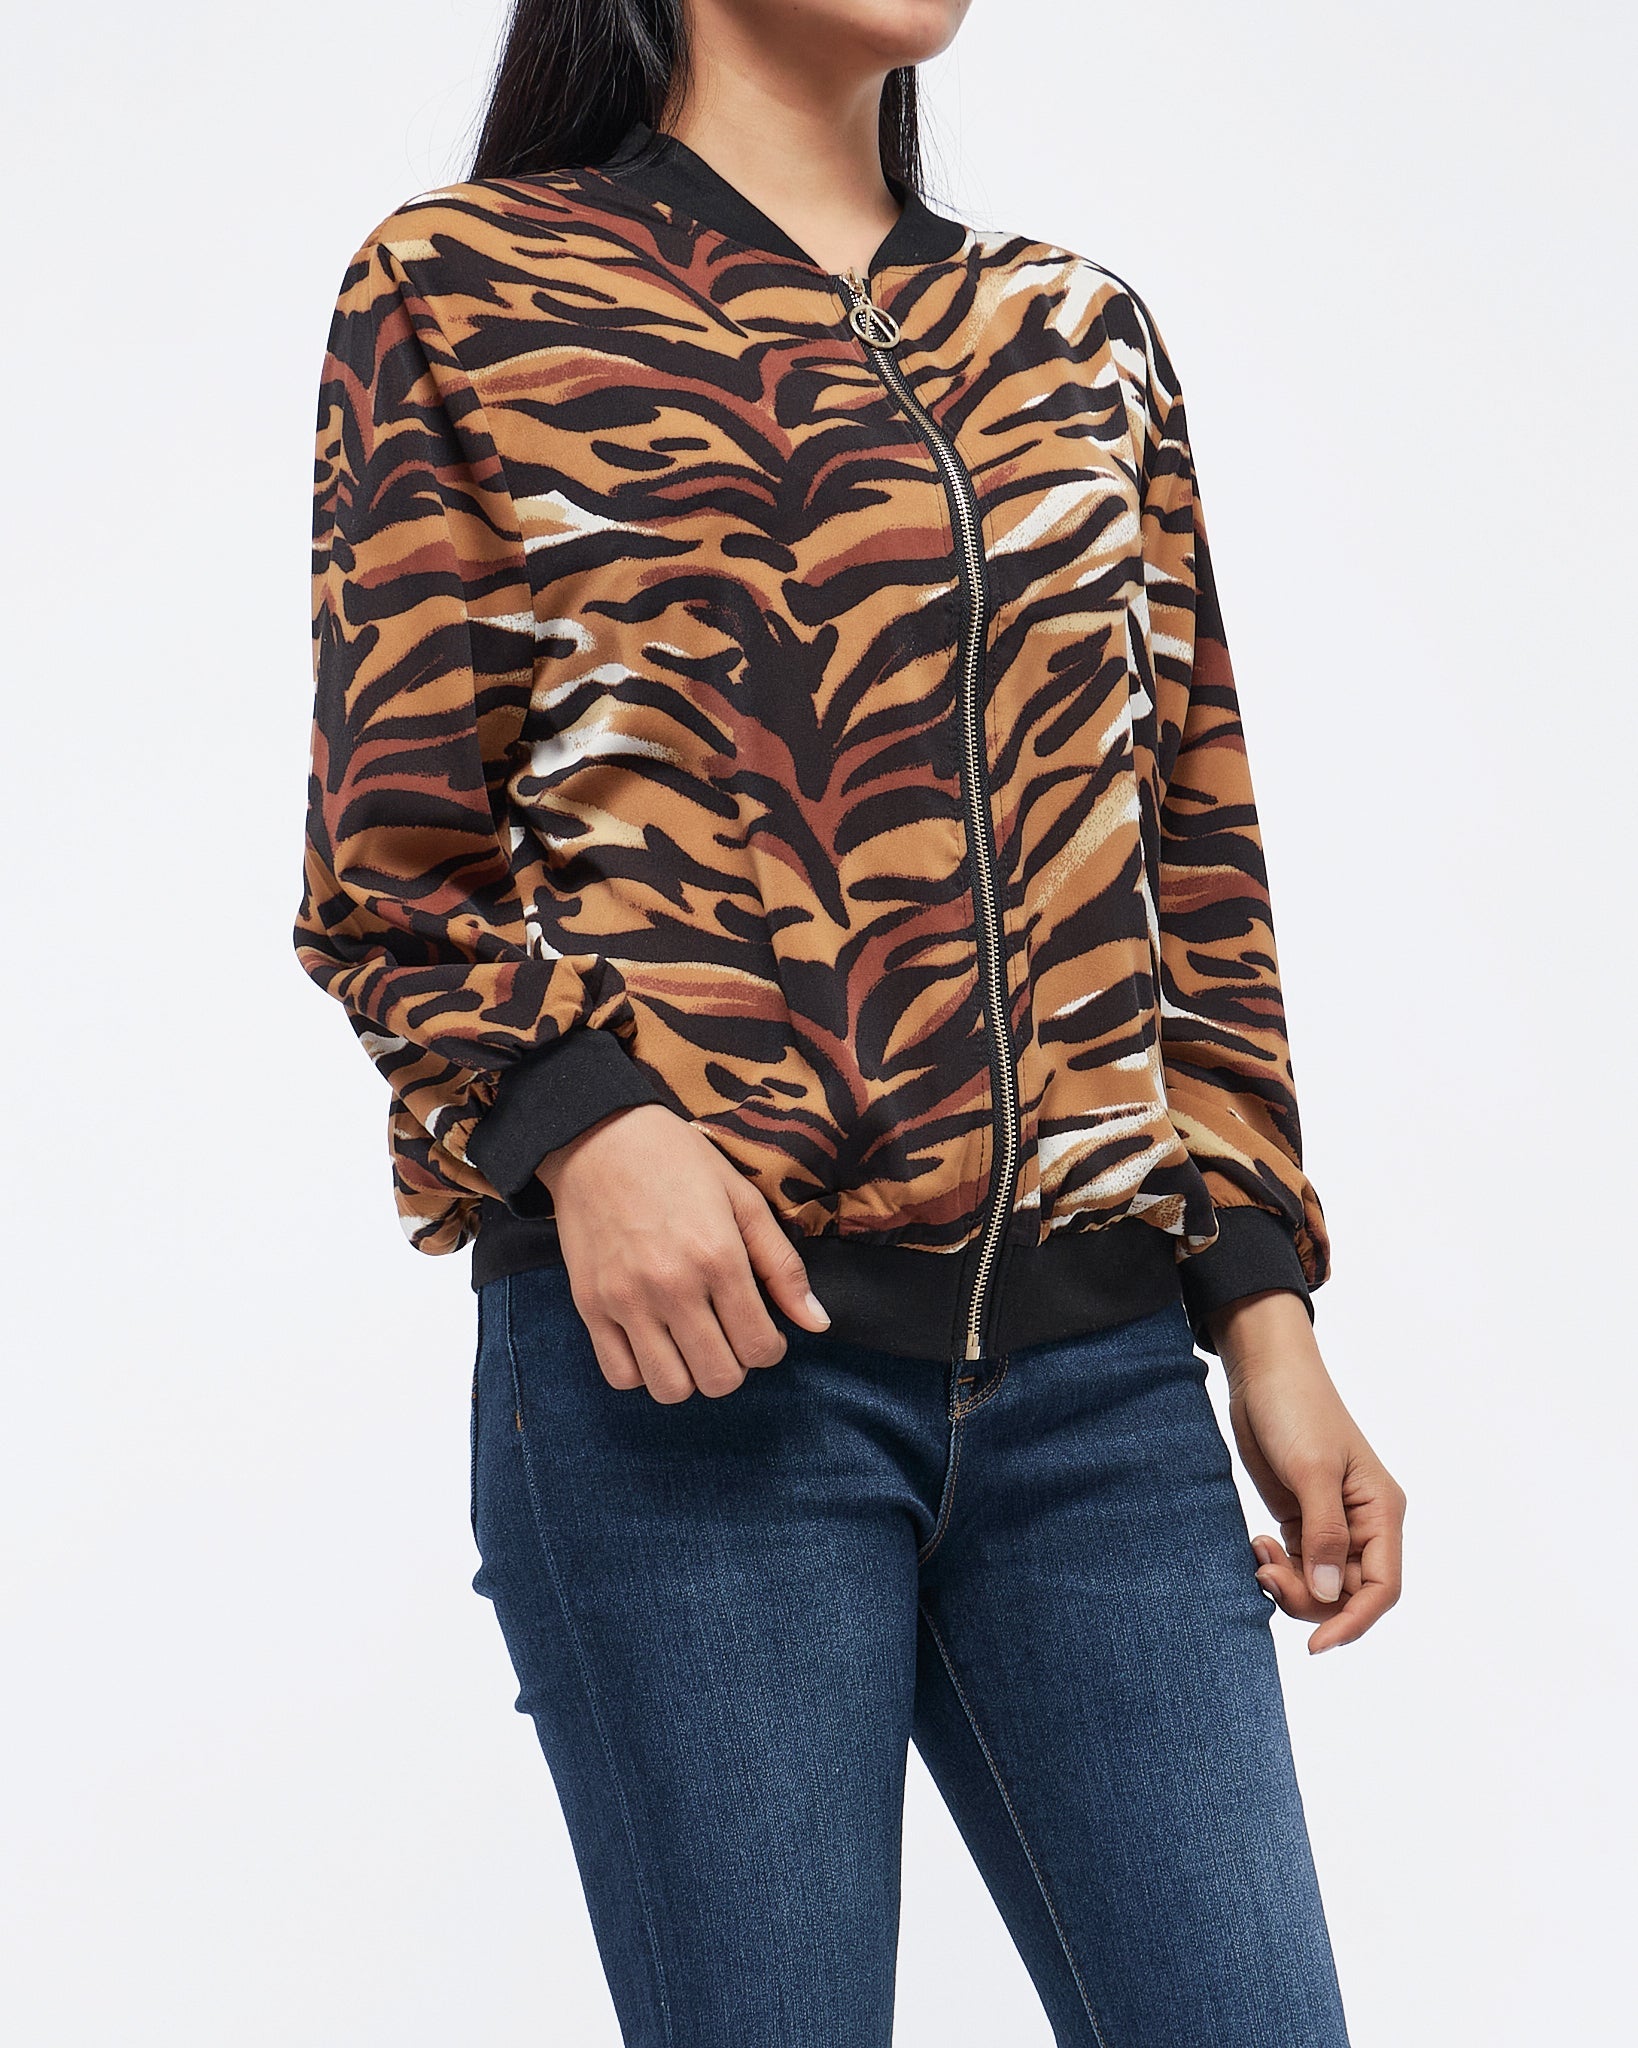 MOI OUTFIT-Tiger Skin Pattern Lady Jacket 17.90